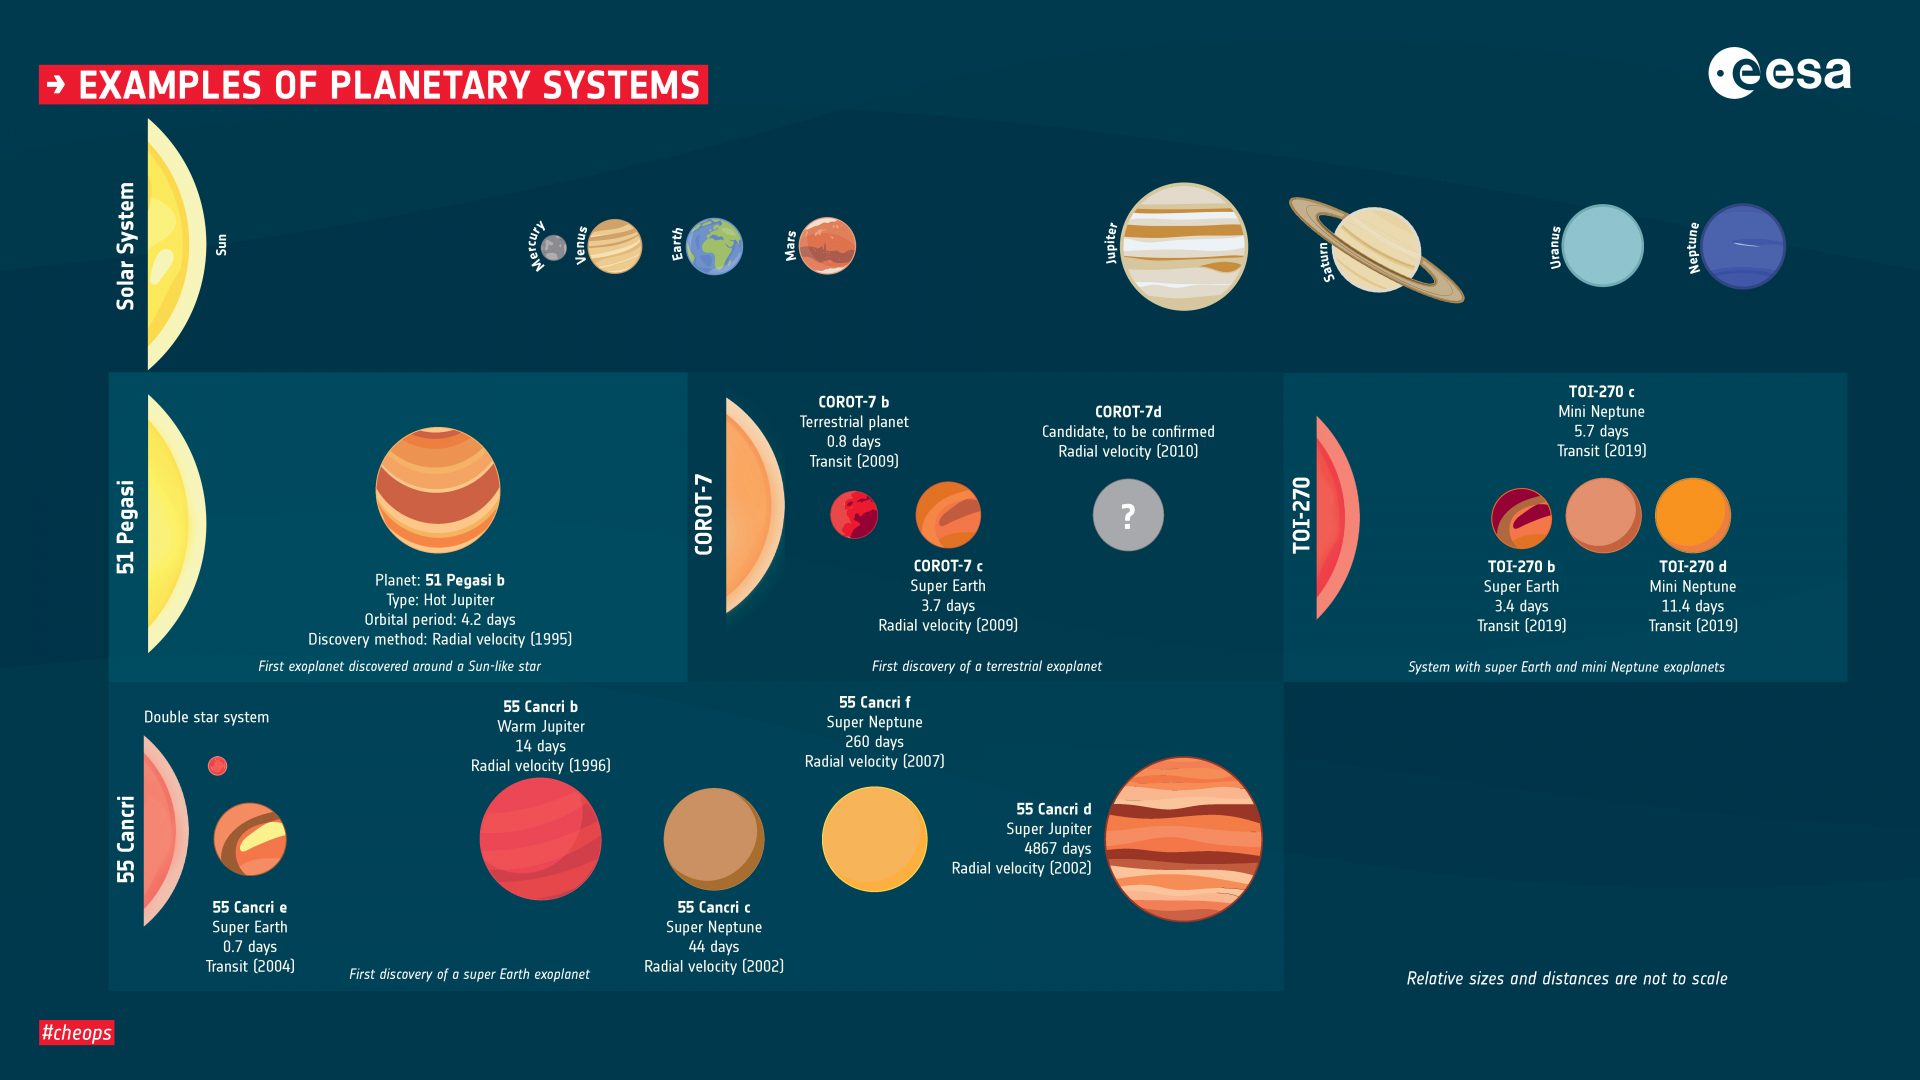 Examples of planetary systems . Credits: ESA